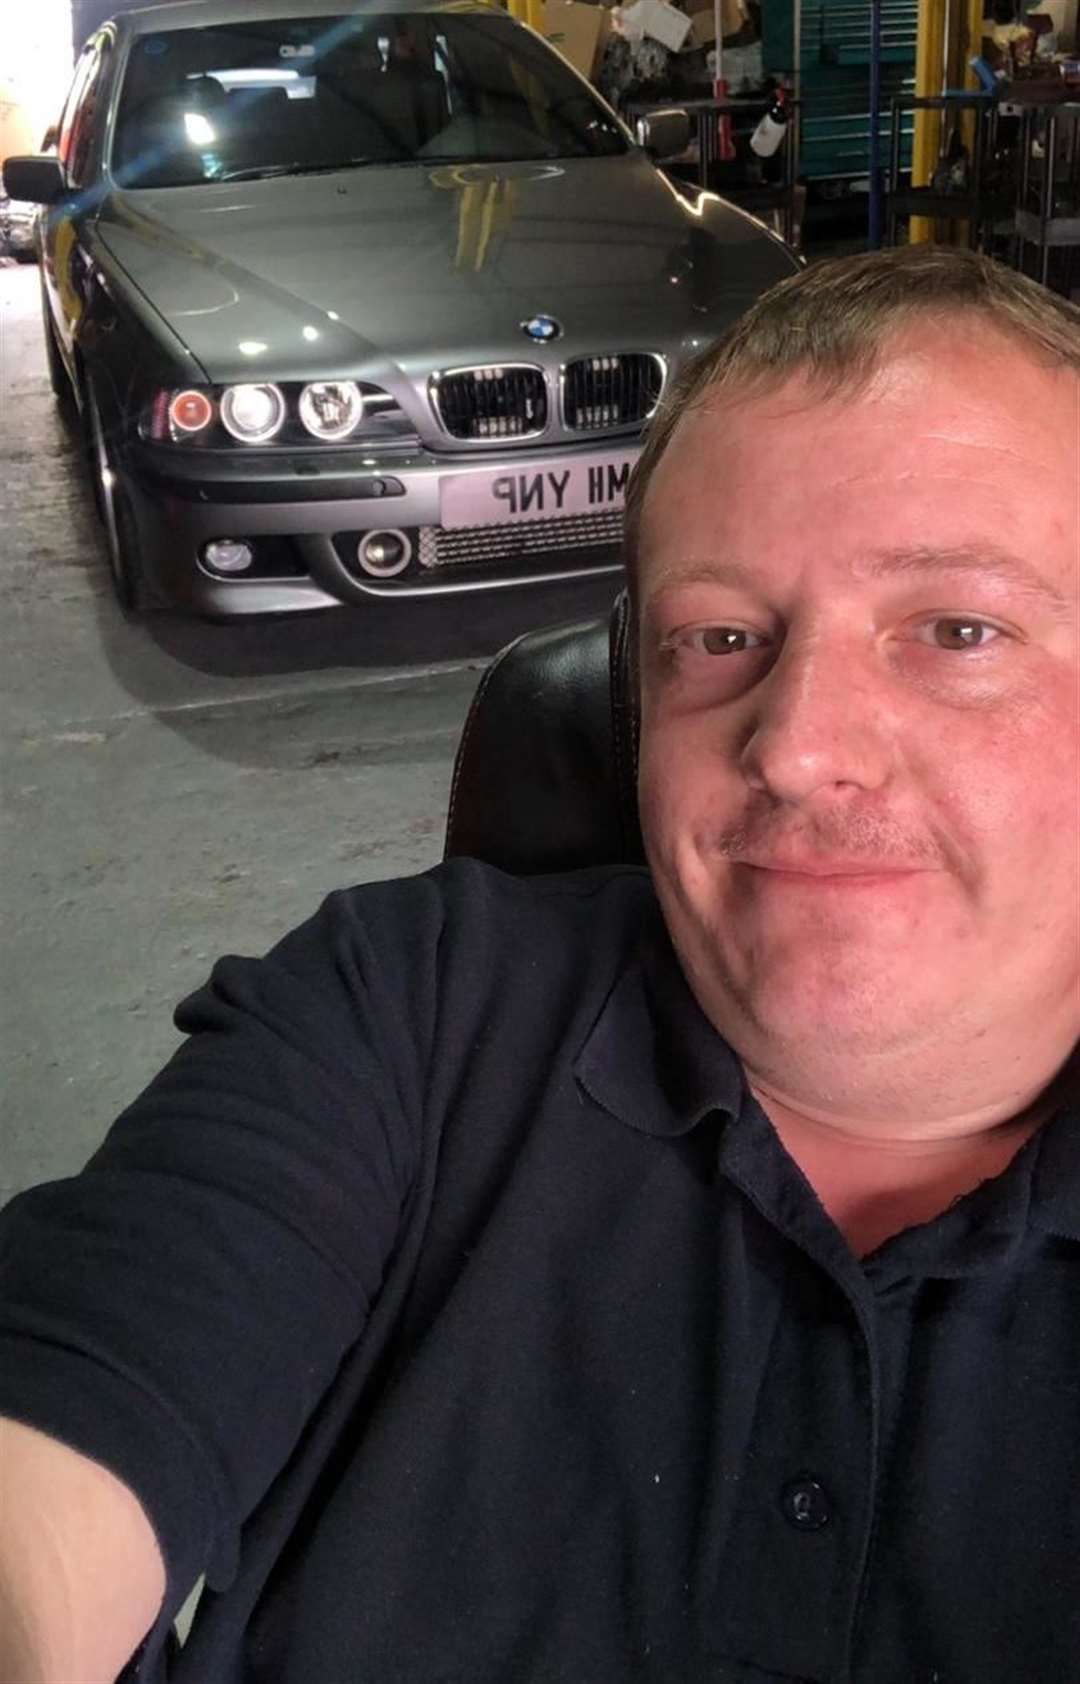 Garage owner Martin Hind was surprised when he checked the CCTV